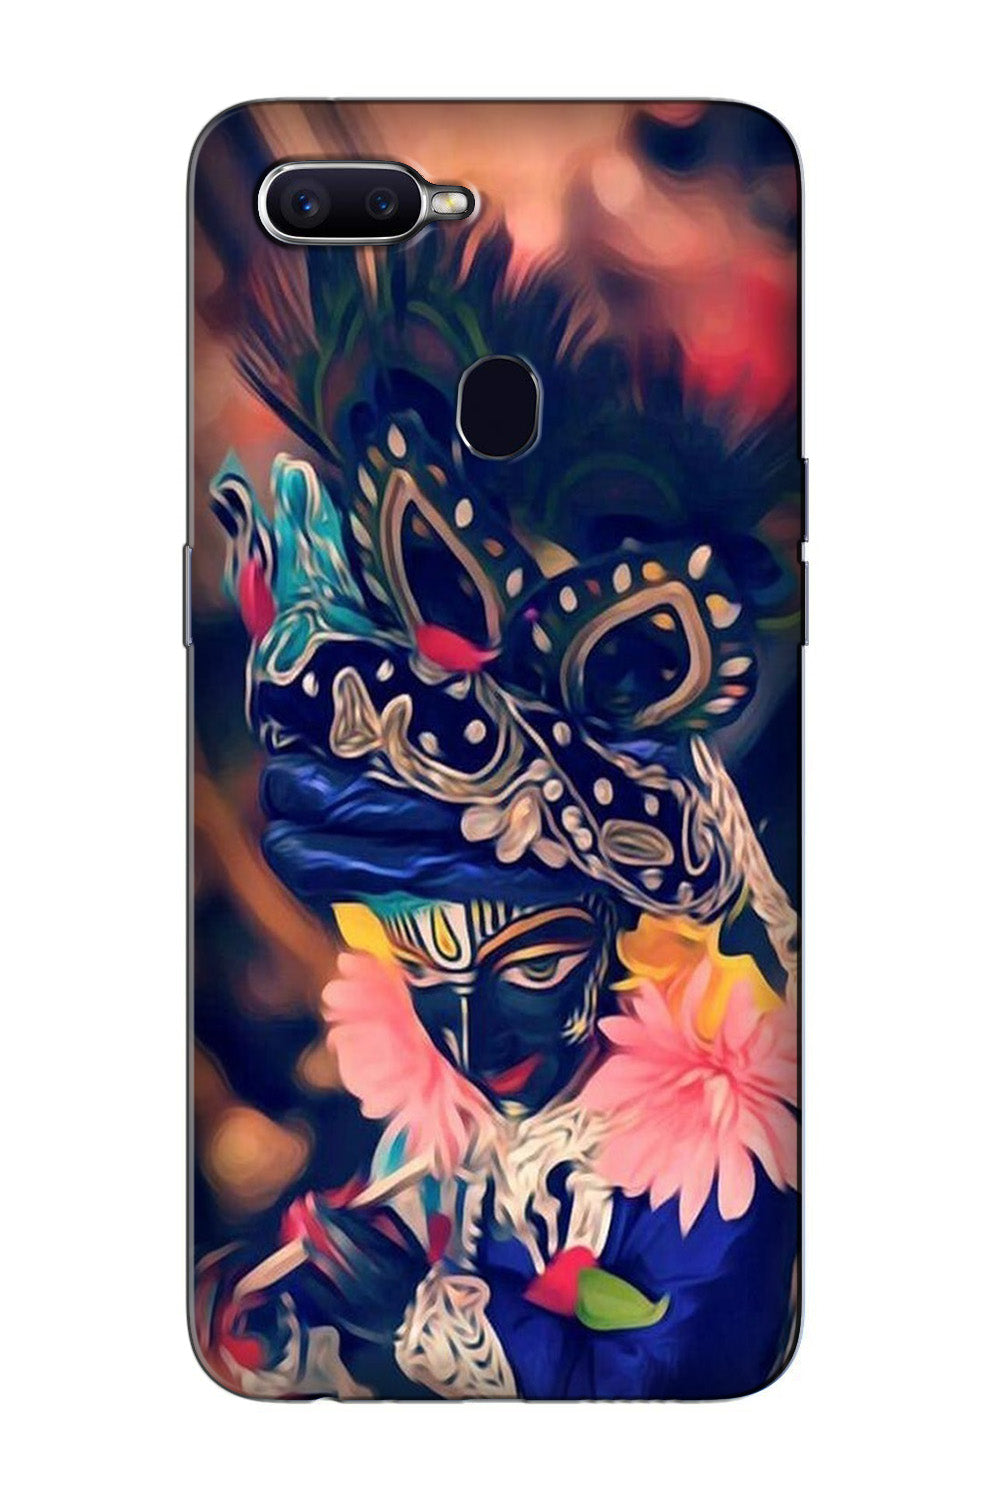 Lord Krishna Case for Oppo F7